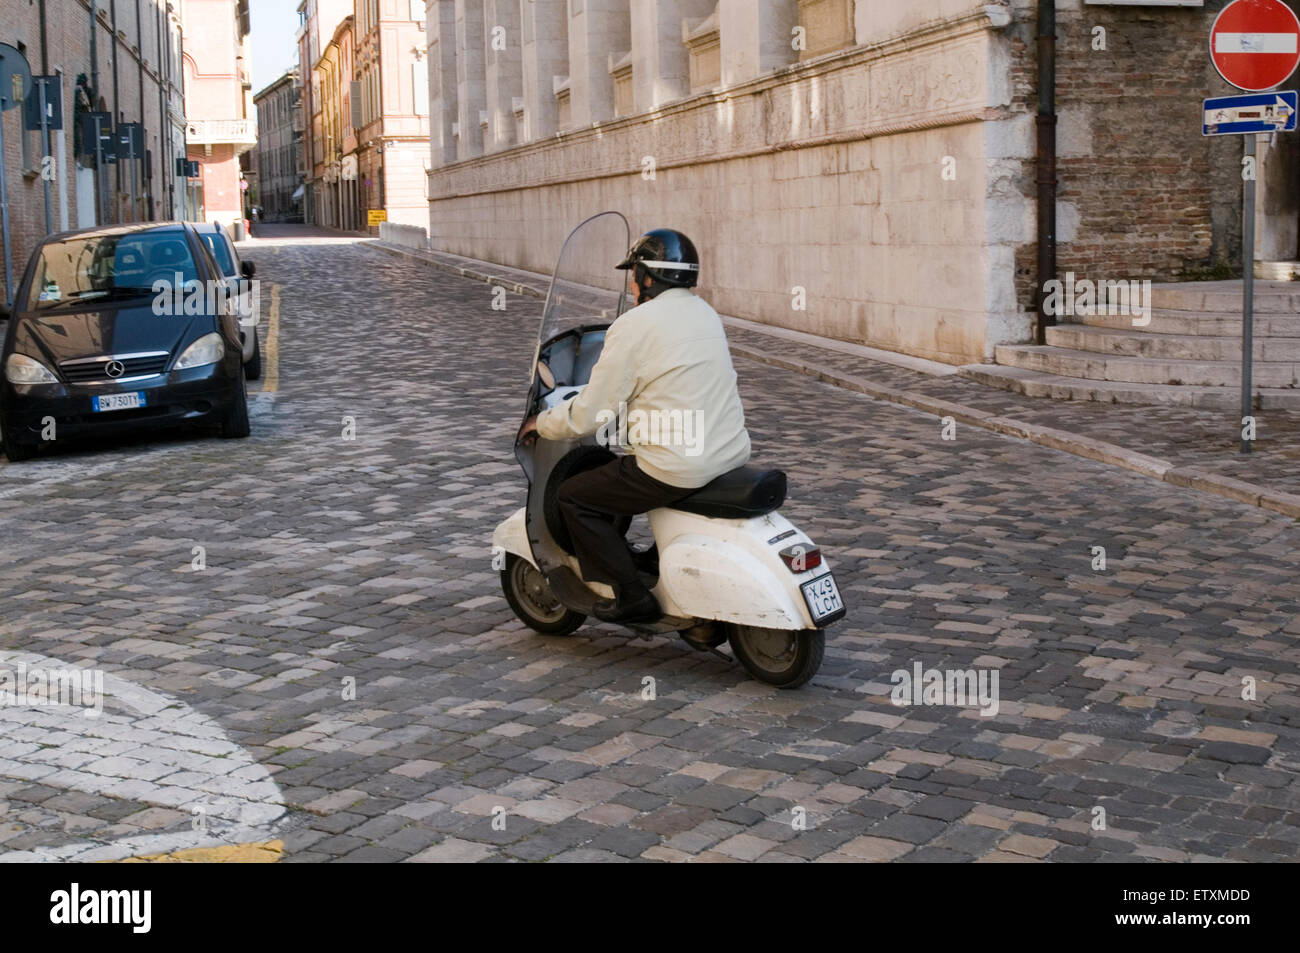 old man riding a scooter moped scooters mopeds italy italian town vespa lamberetta Stock Photo